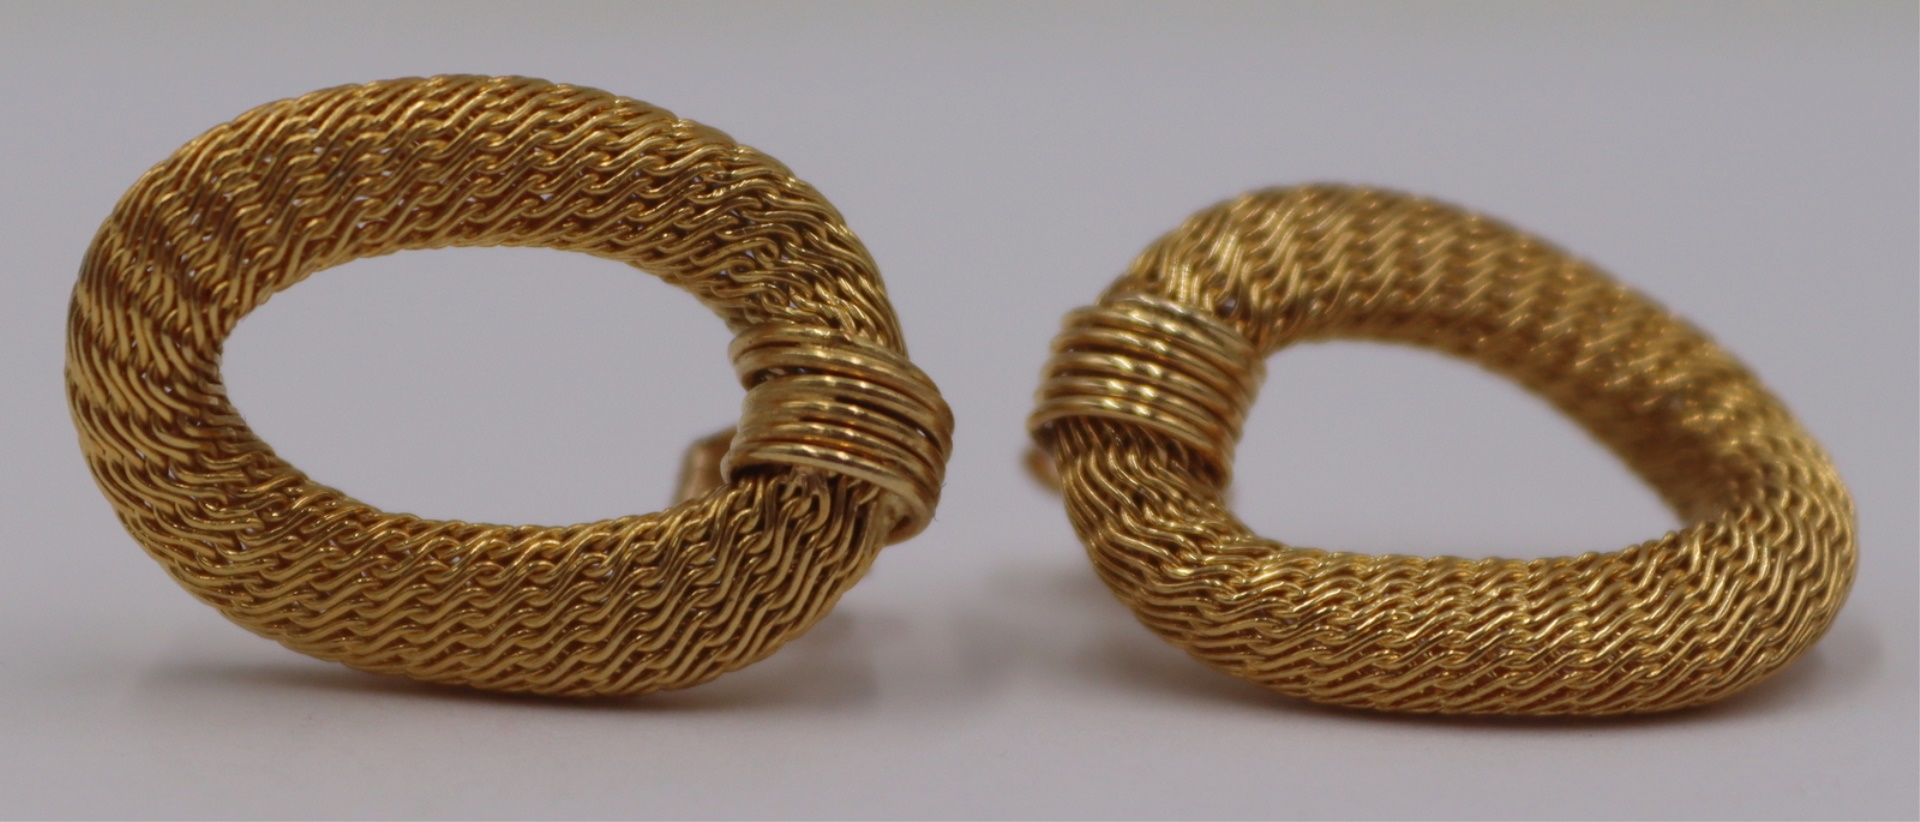 JEWELRY PAIR OF 18KT GOLD WOVEN 3bc03b